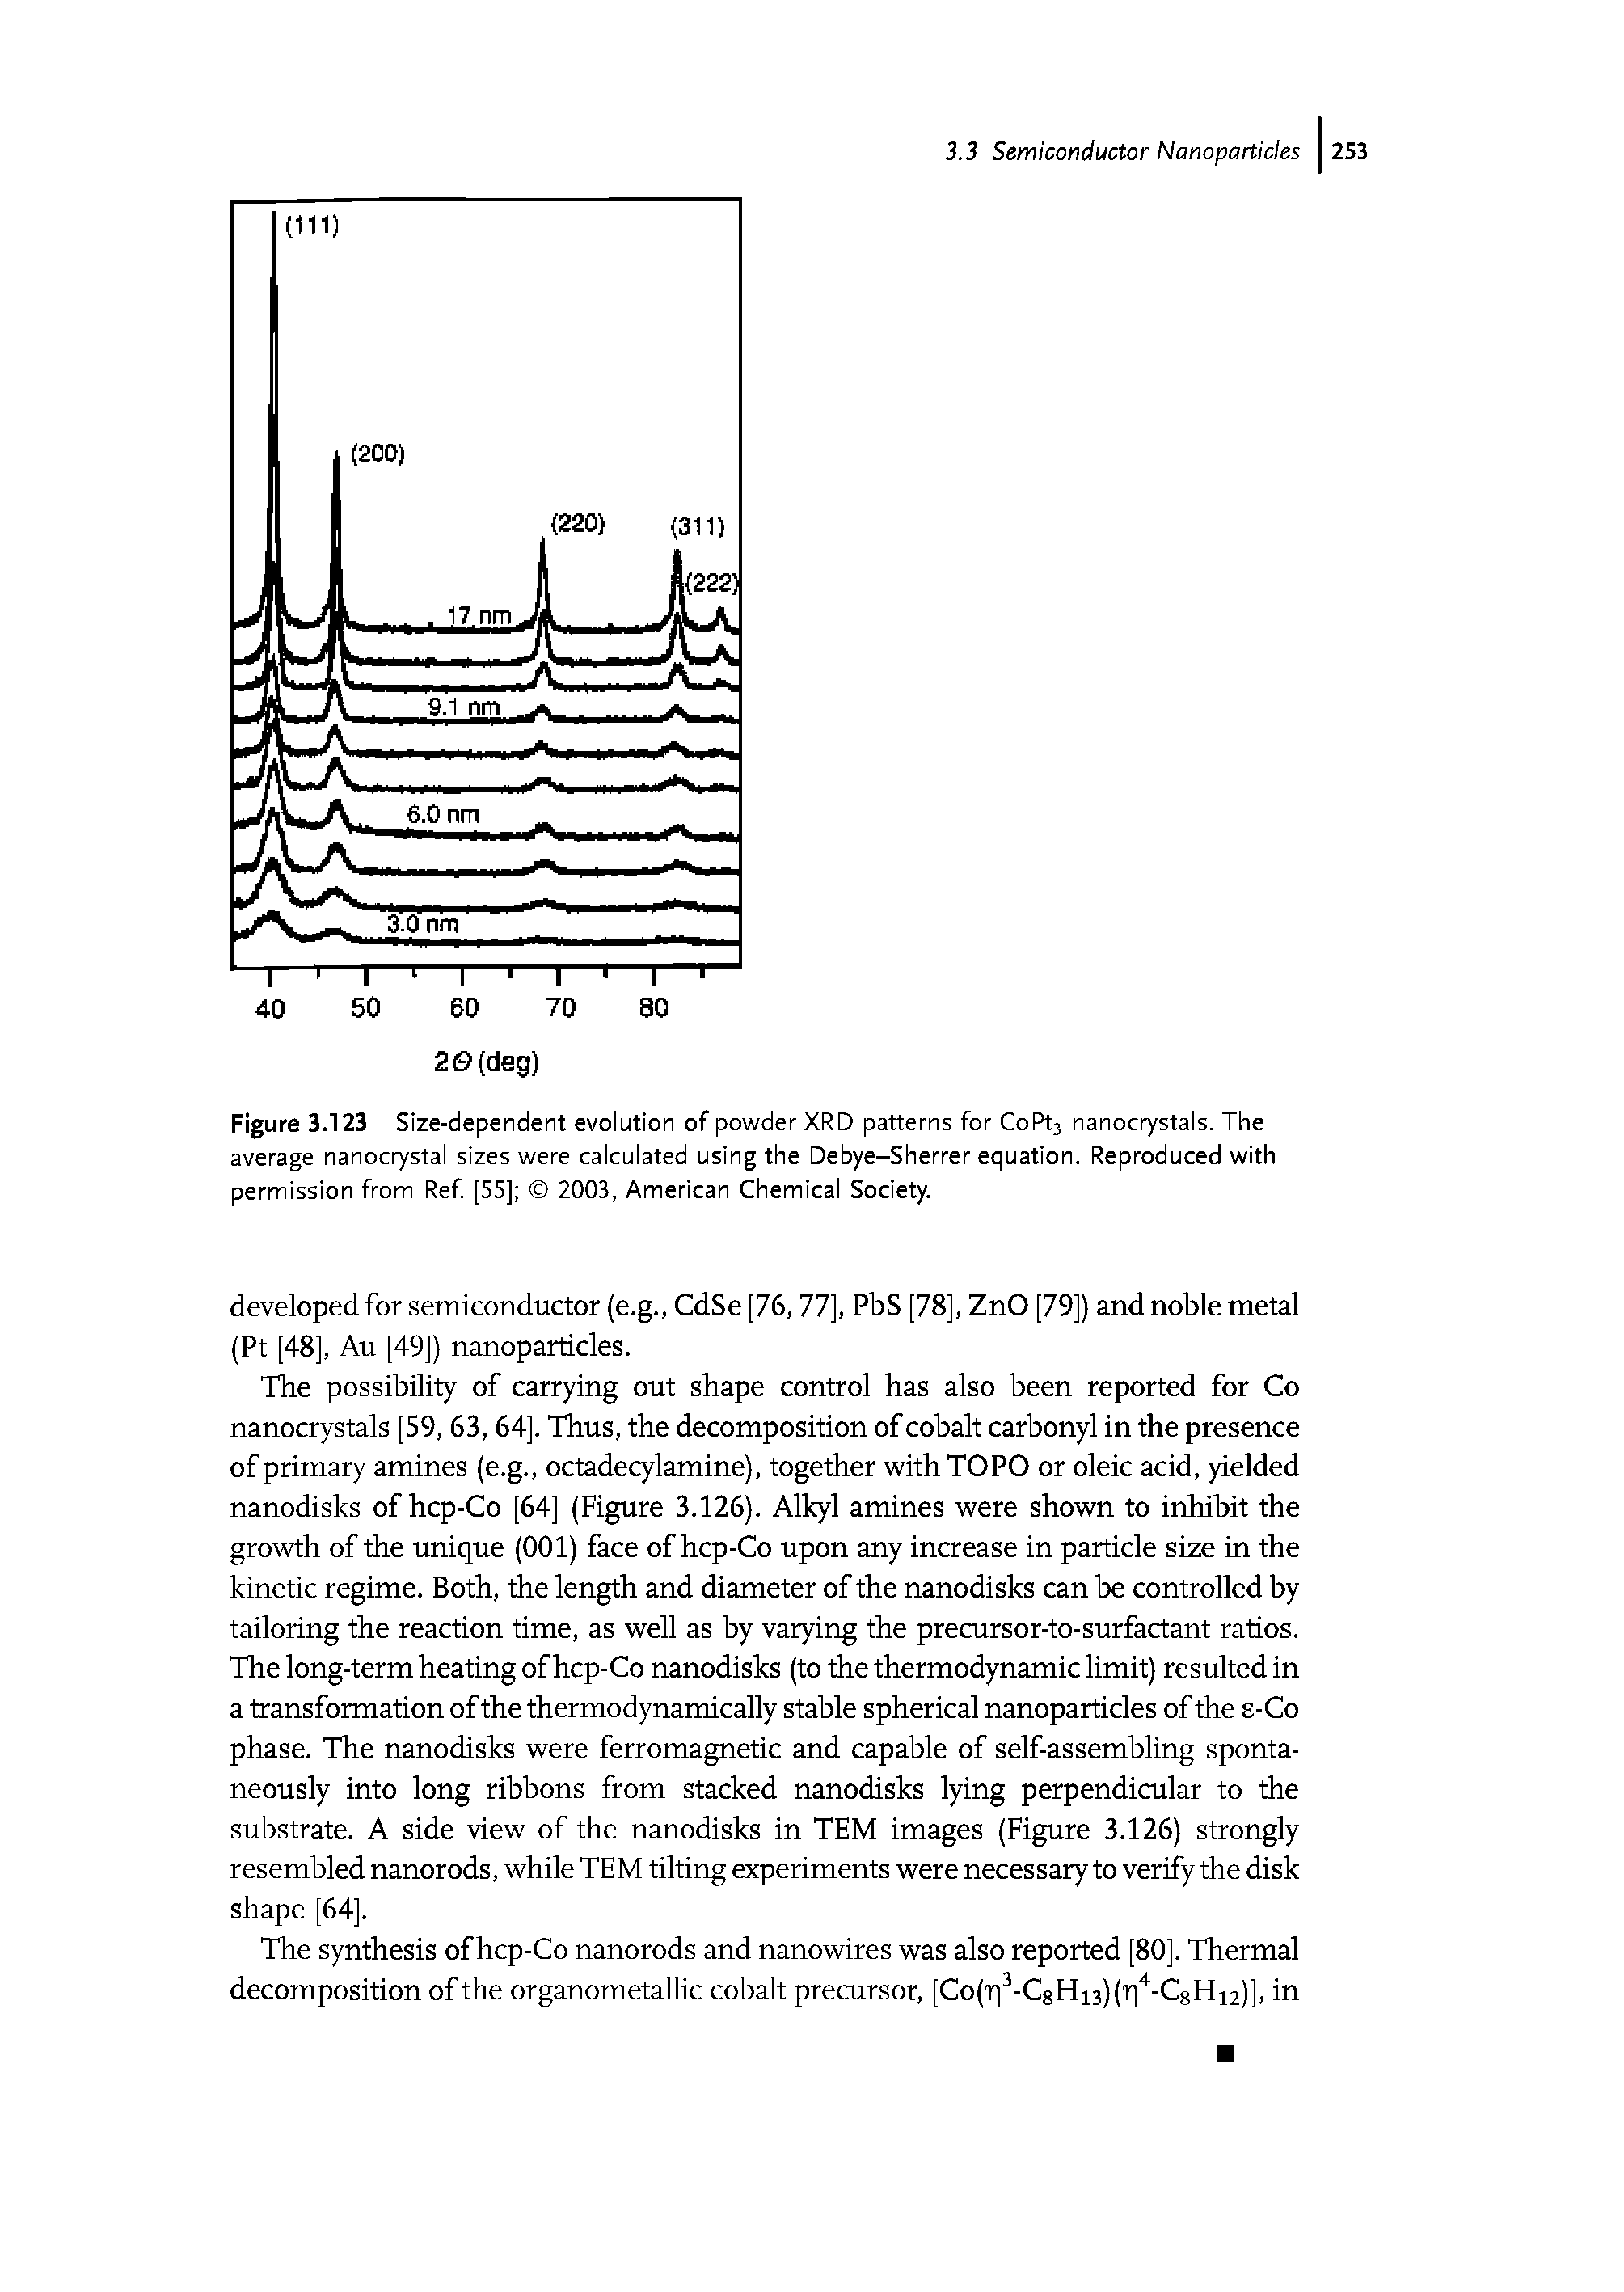 Figure 3.123 Size-dependent evolution of powder XRD patterns for CoPt3 nanoc stals. The average nanoc stal sizes were calculated using the Debye-Sherrer equation. Reproduced with permission from Ref [55] 2003, American Chemical Society.